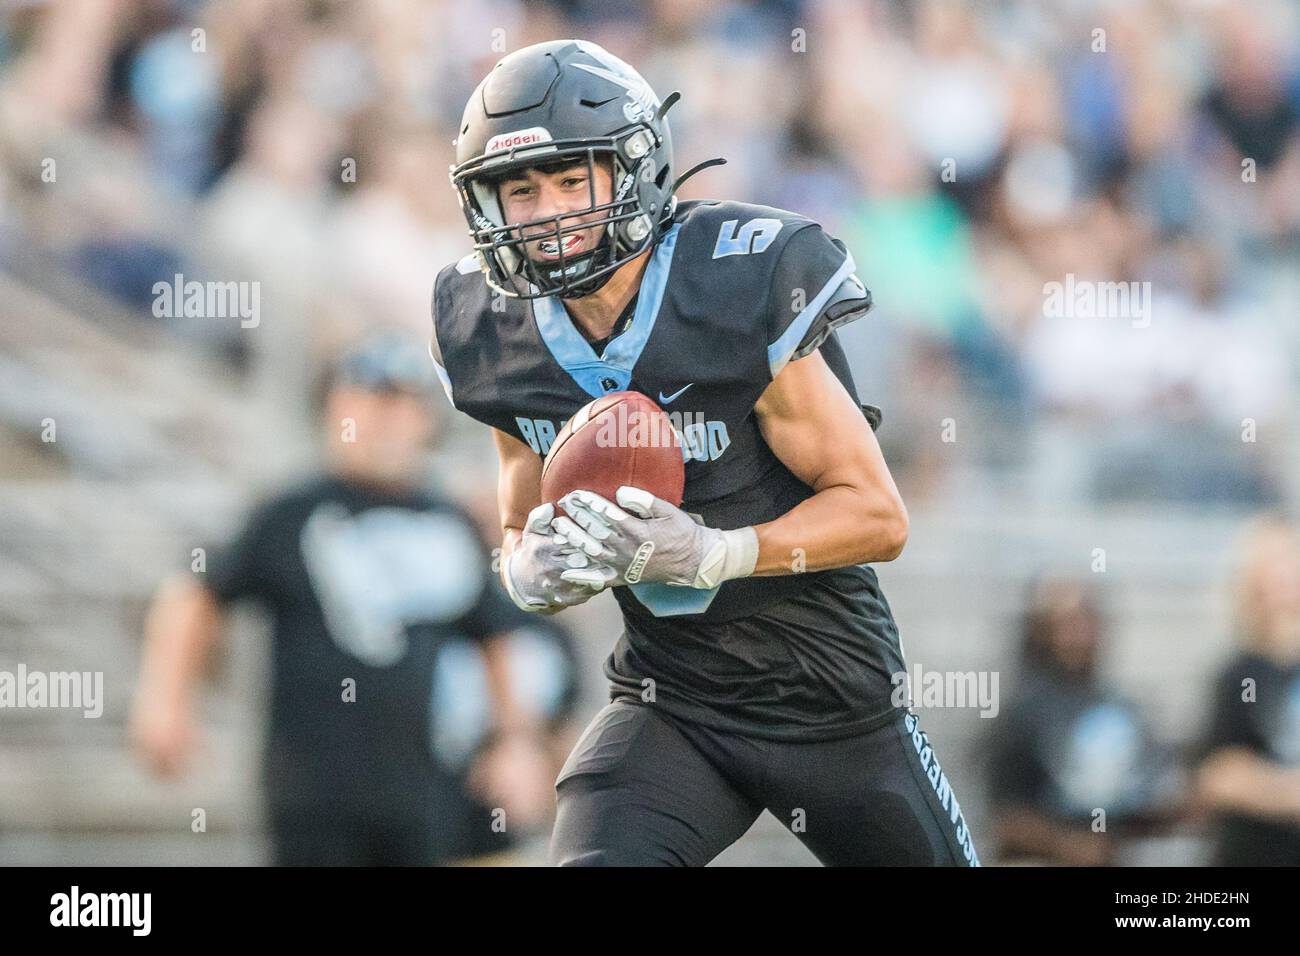 August 27, 2021: Brazoswood's Cole Hagan (5) runs for positive yardage after catching a pass in a Texas University Interscholastic League (UIL) high school football game between the Santa Fe Indians and the Brazoswood Buccaneers at Hopper Field in Freeport, Texas. Prentice C. James via CSM Stock Photo